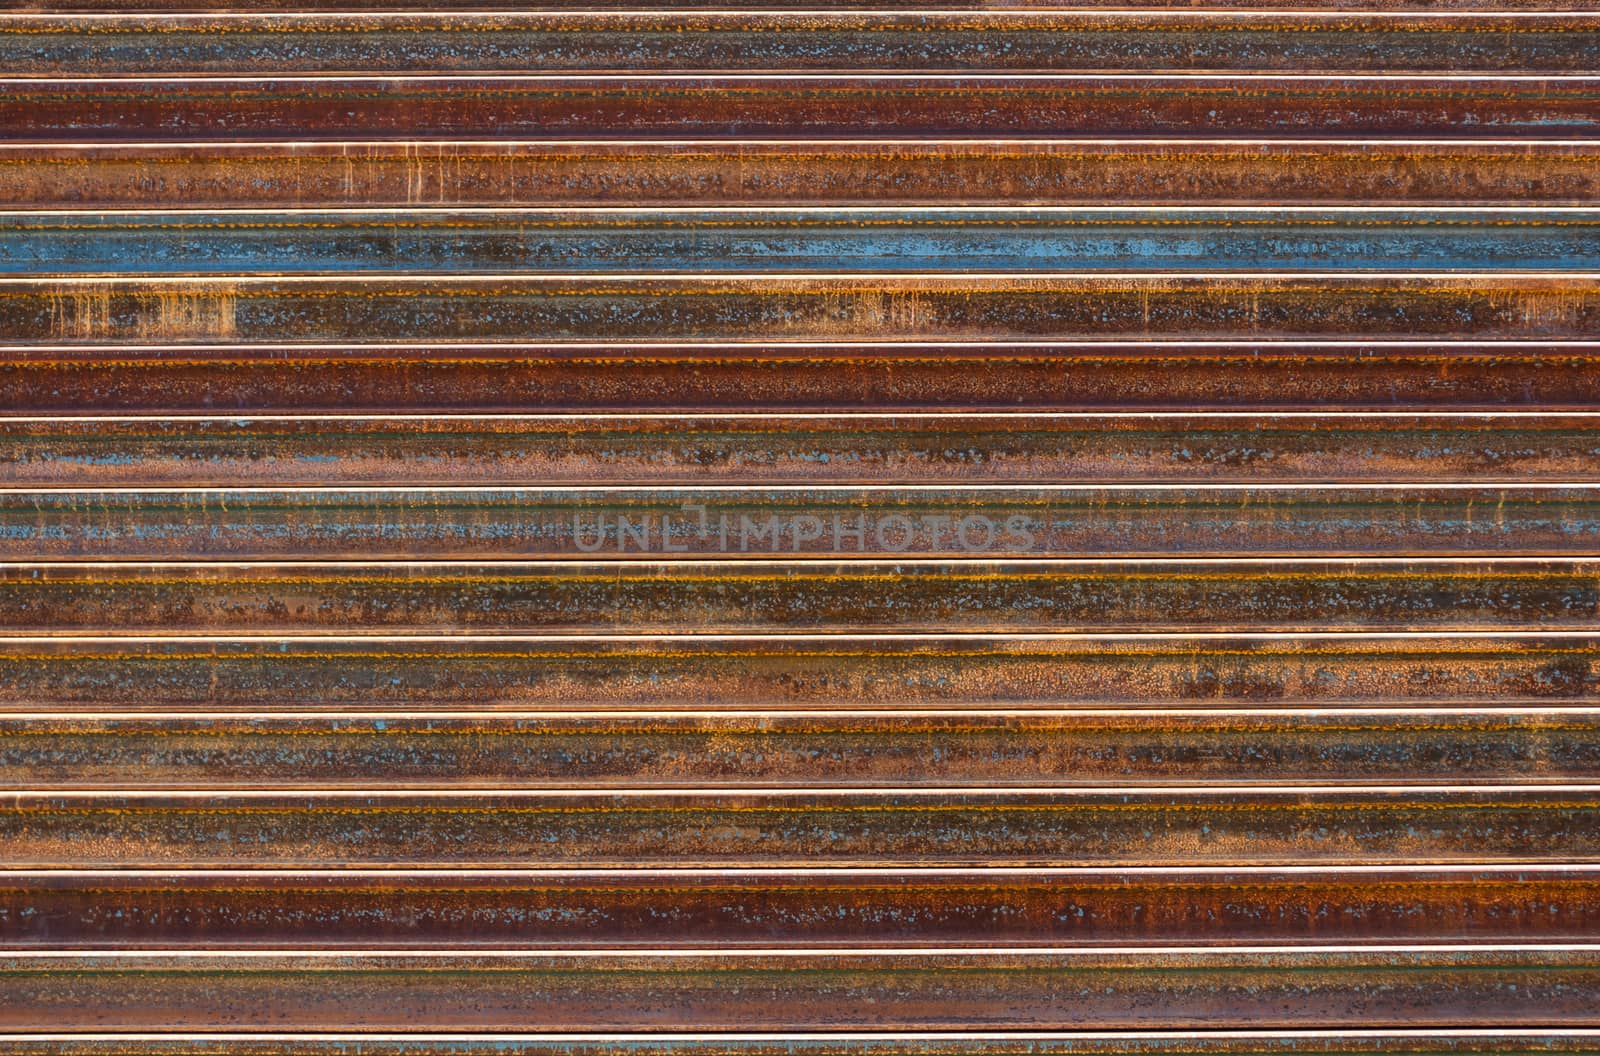 Stack of Rusty Railway Background/ Texture.